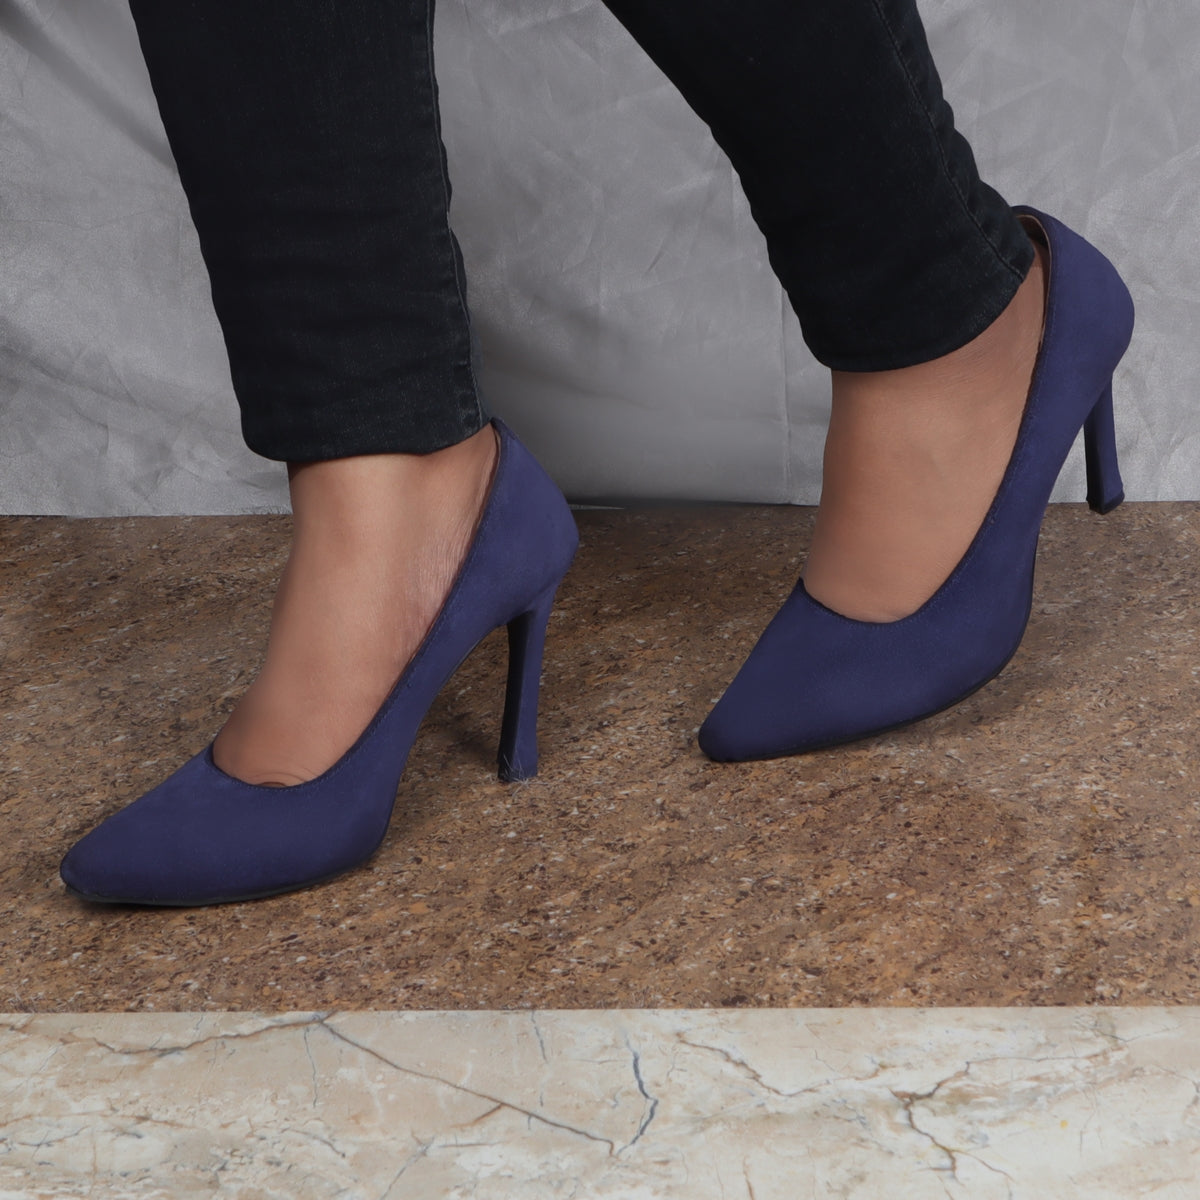 Chic / Beautiful Navy Blue Casual Pumps 2020 Suede 7 cm Stiletto Heels  Pointed Toe Pumps